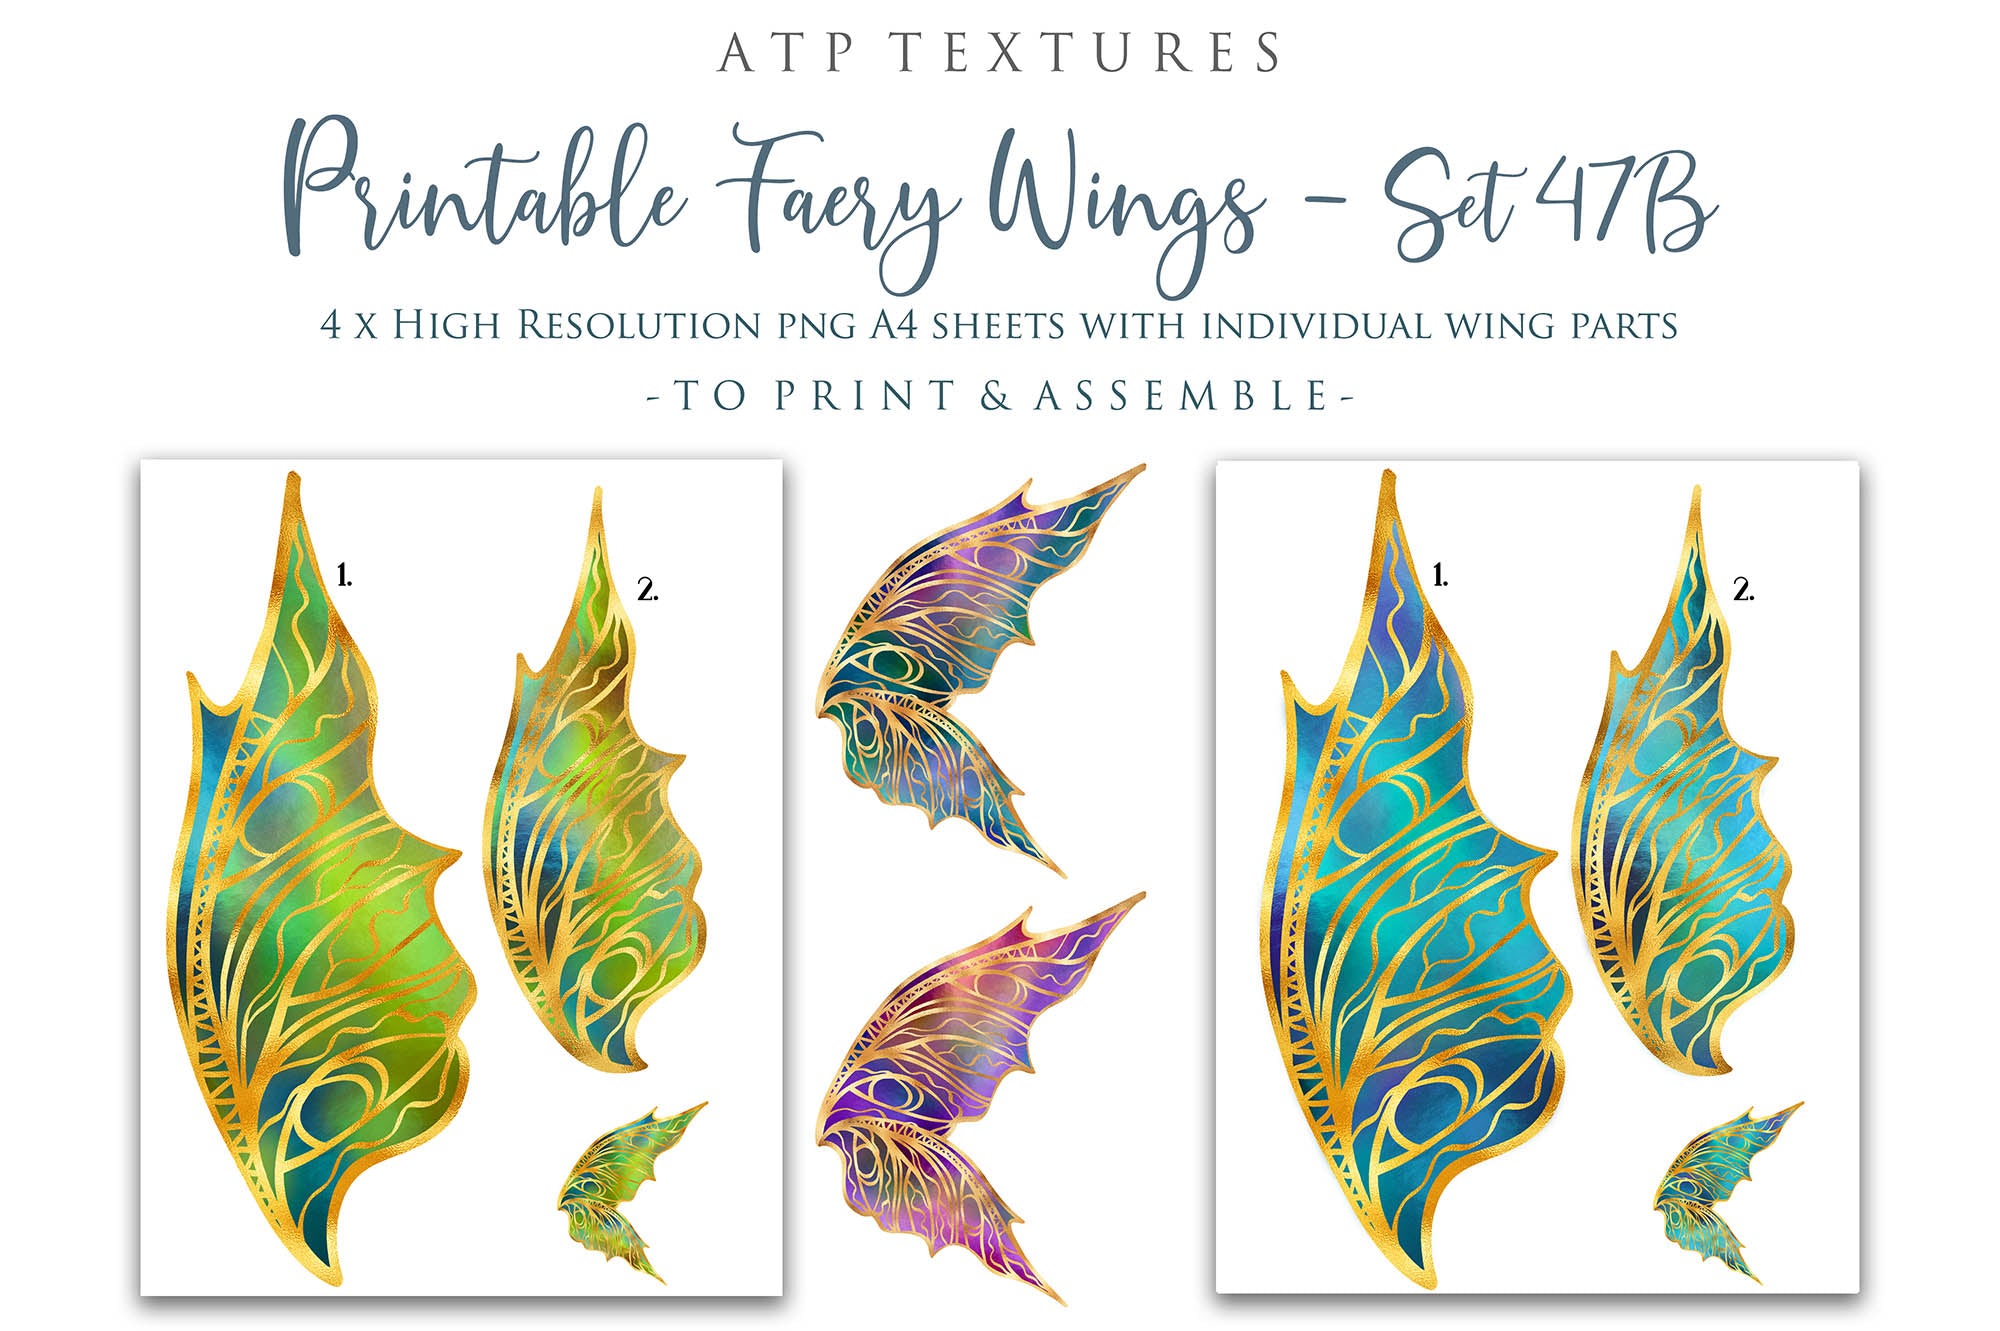 PRINTABLE FAIRY WINGS - Set 47 - Gold